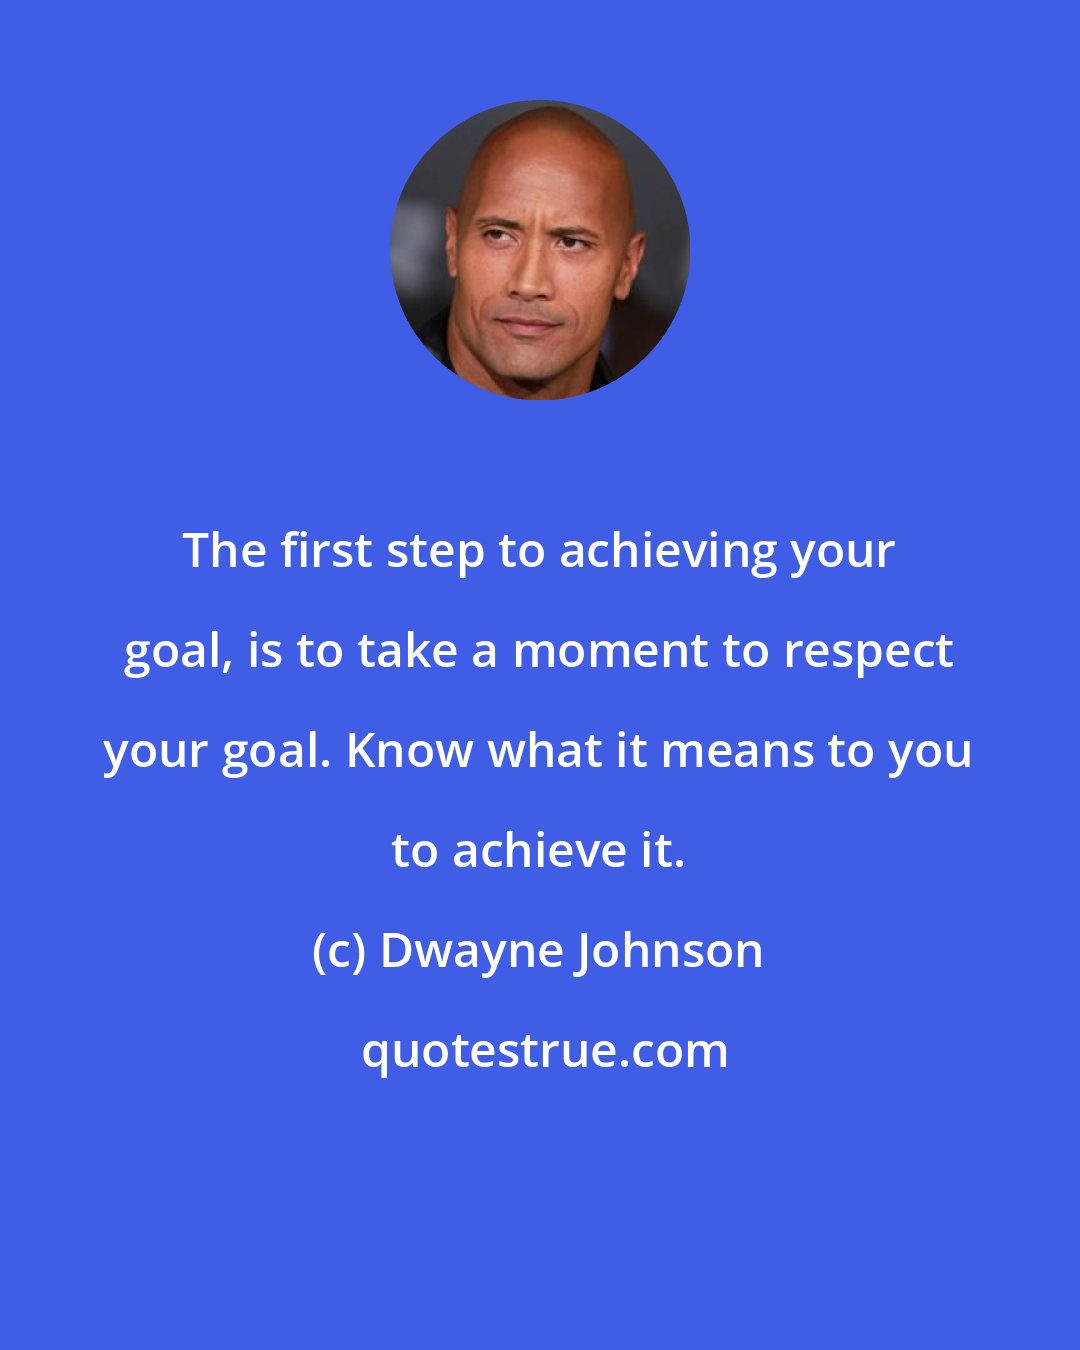 Dwayne Johnson: The first step to achieving your goal, is to take a moment to respect your goal. Know what it means to you to achieve it.